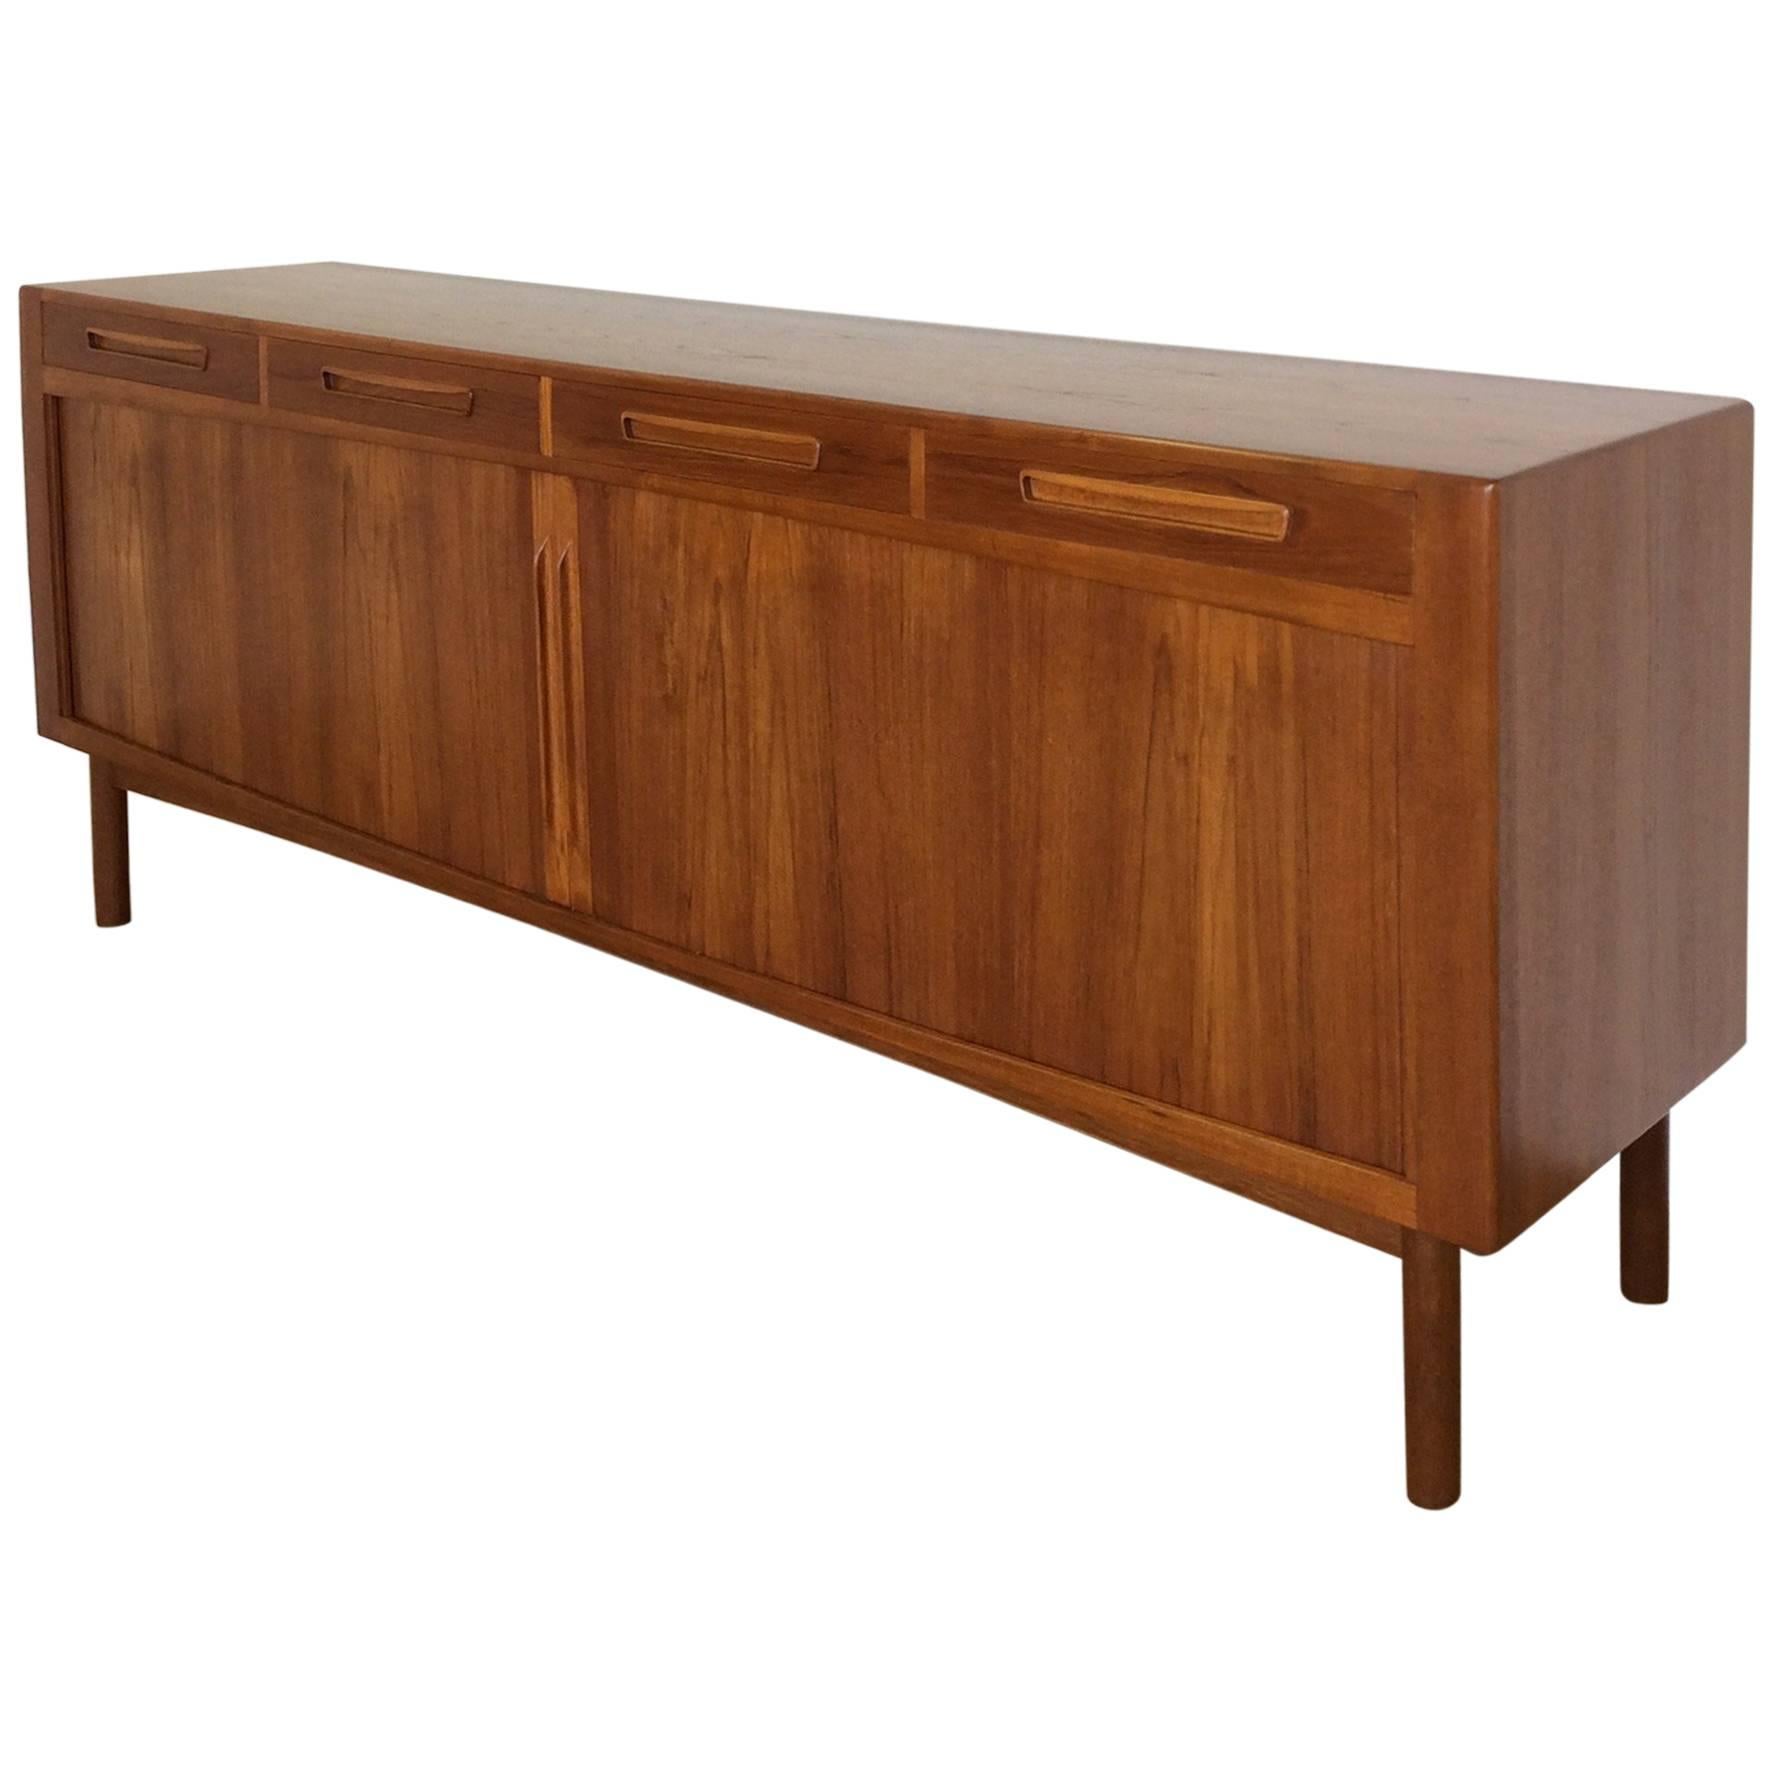 Midcentury Sideboard Credenza with Tambour Doors by Arne Hovmand Olsen For Sale